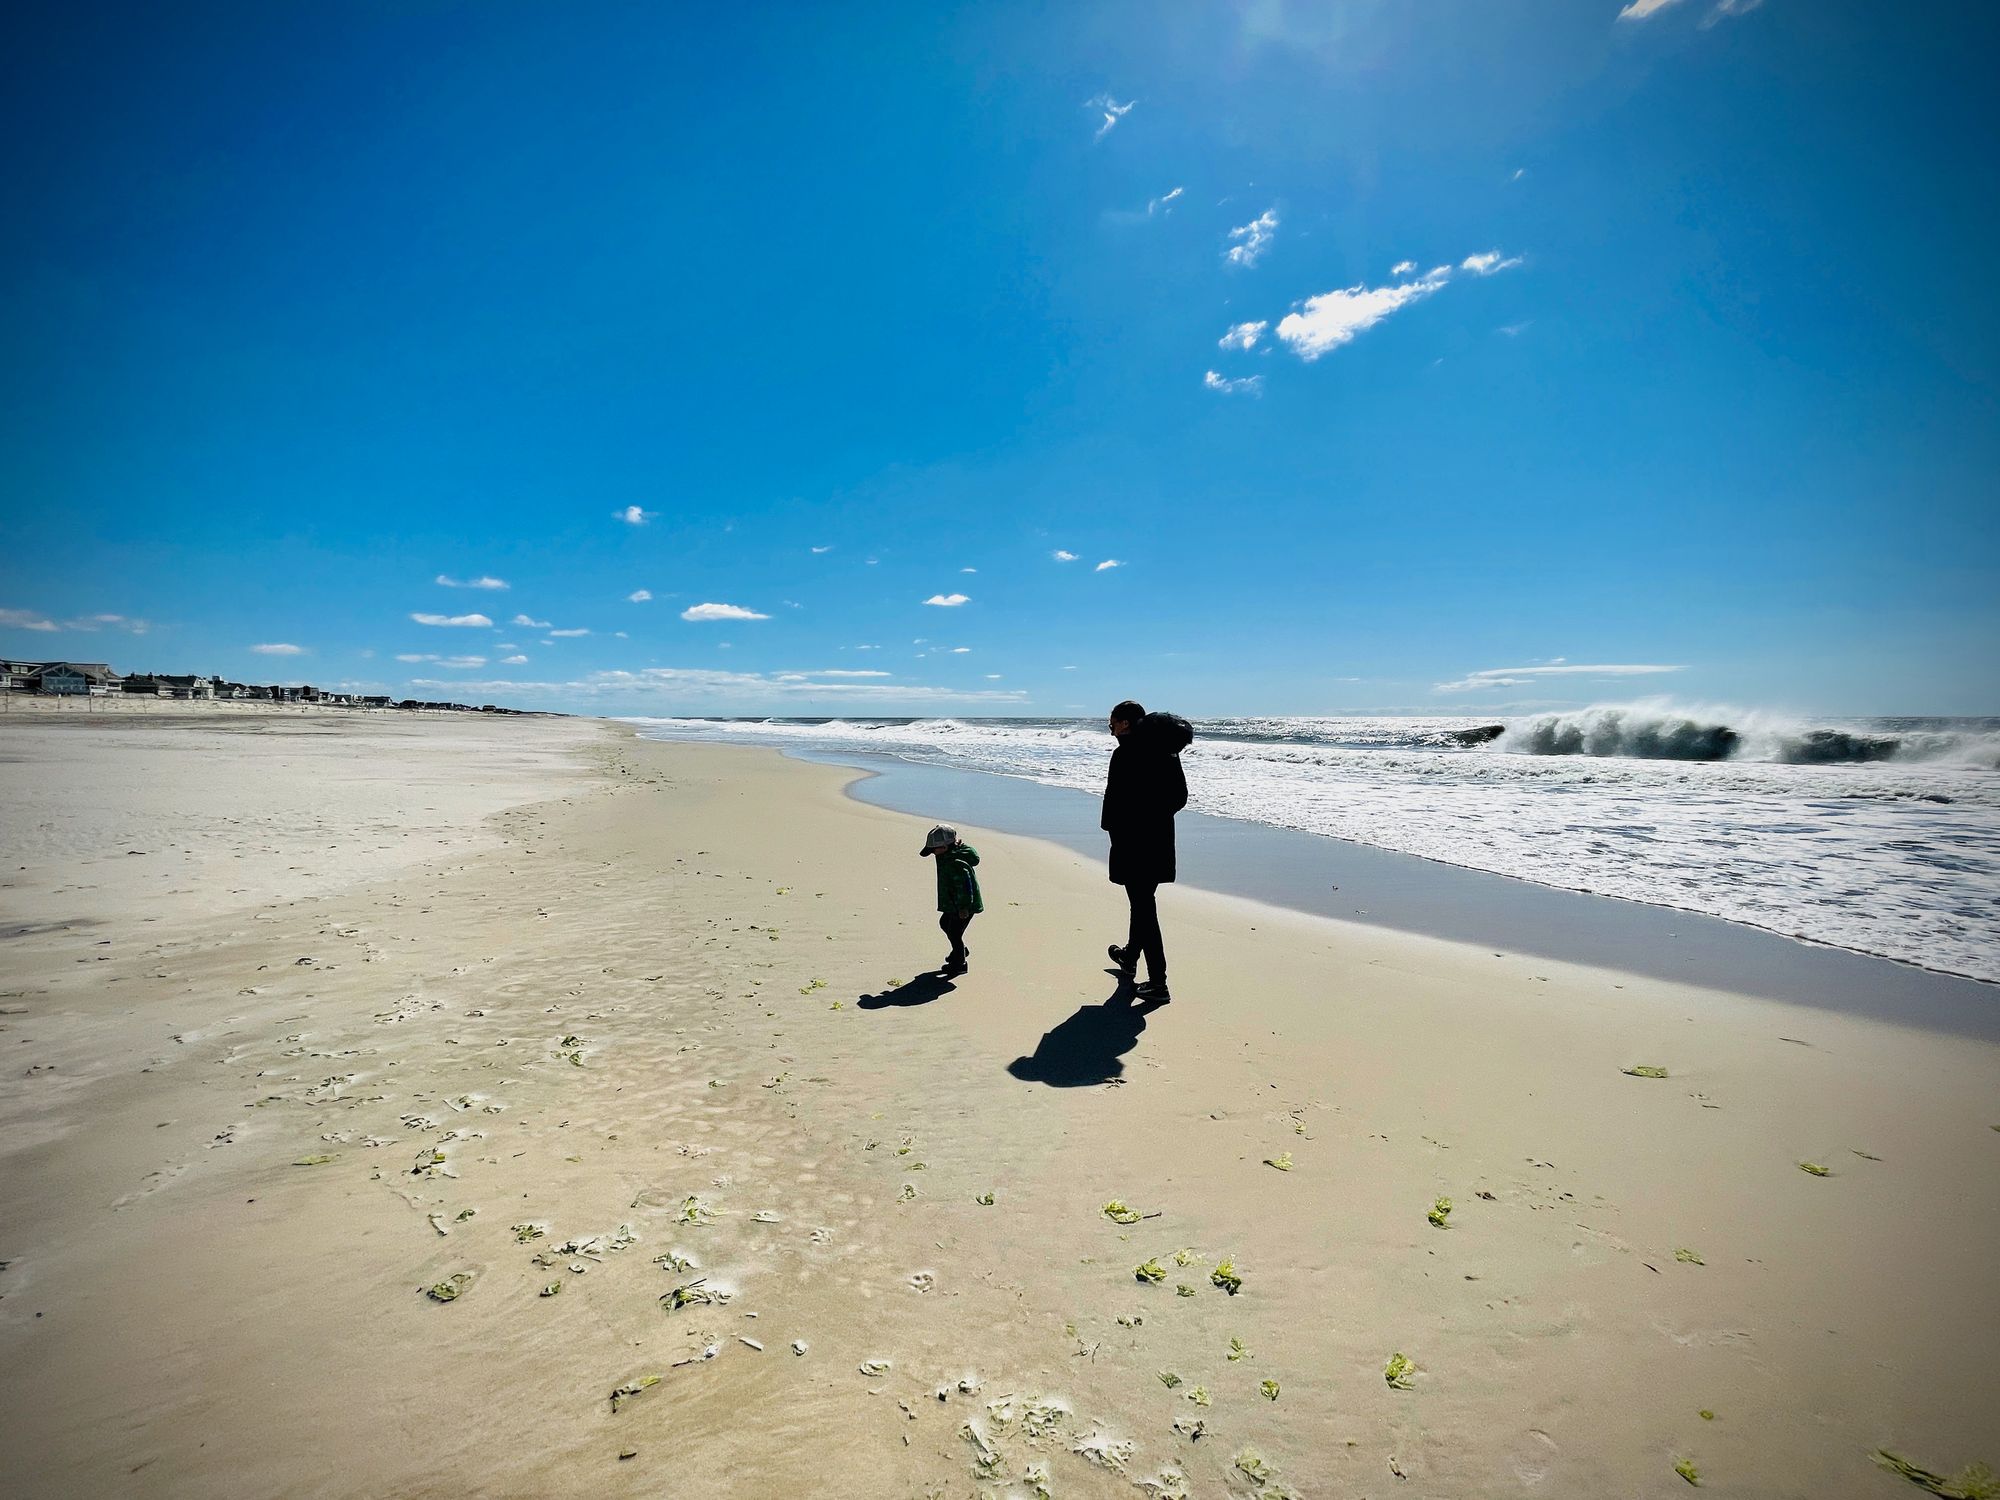 Two people, one child and one adult, walking on the beach.